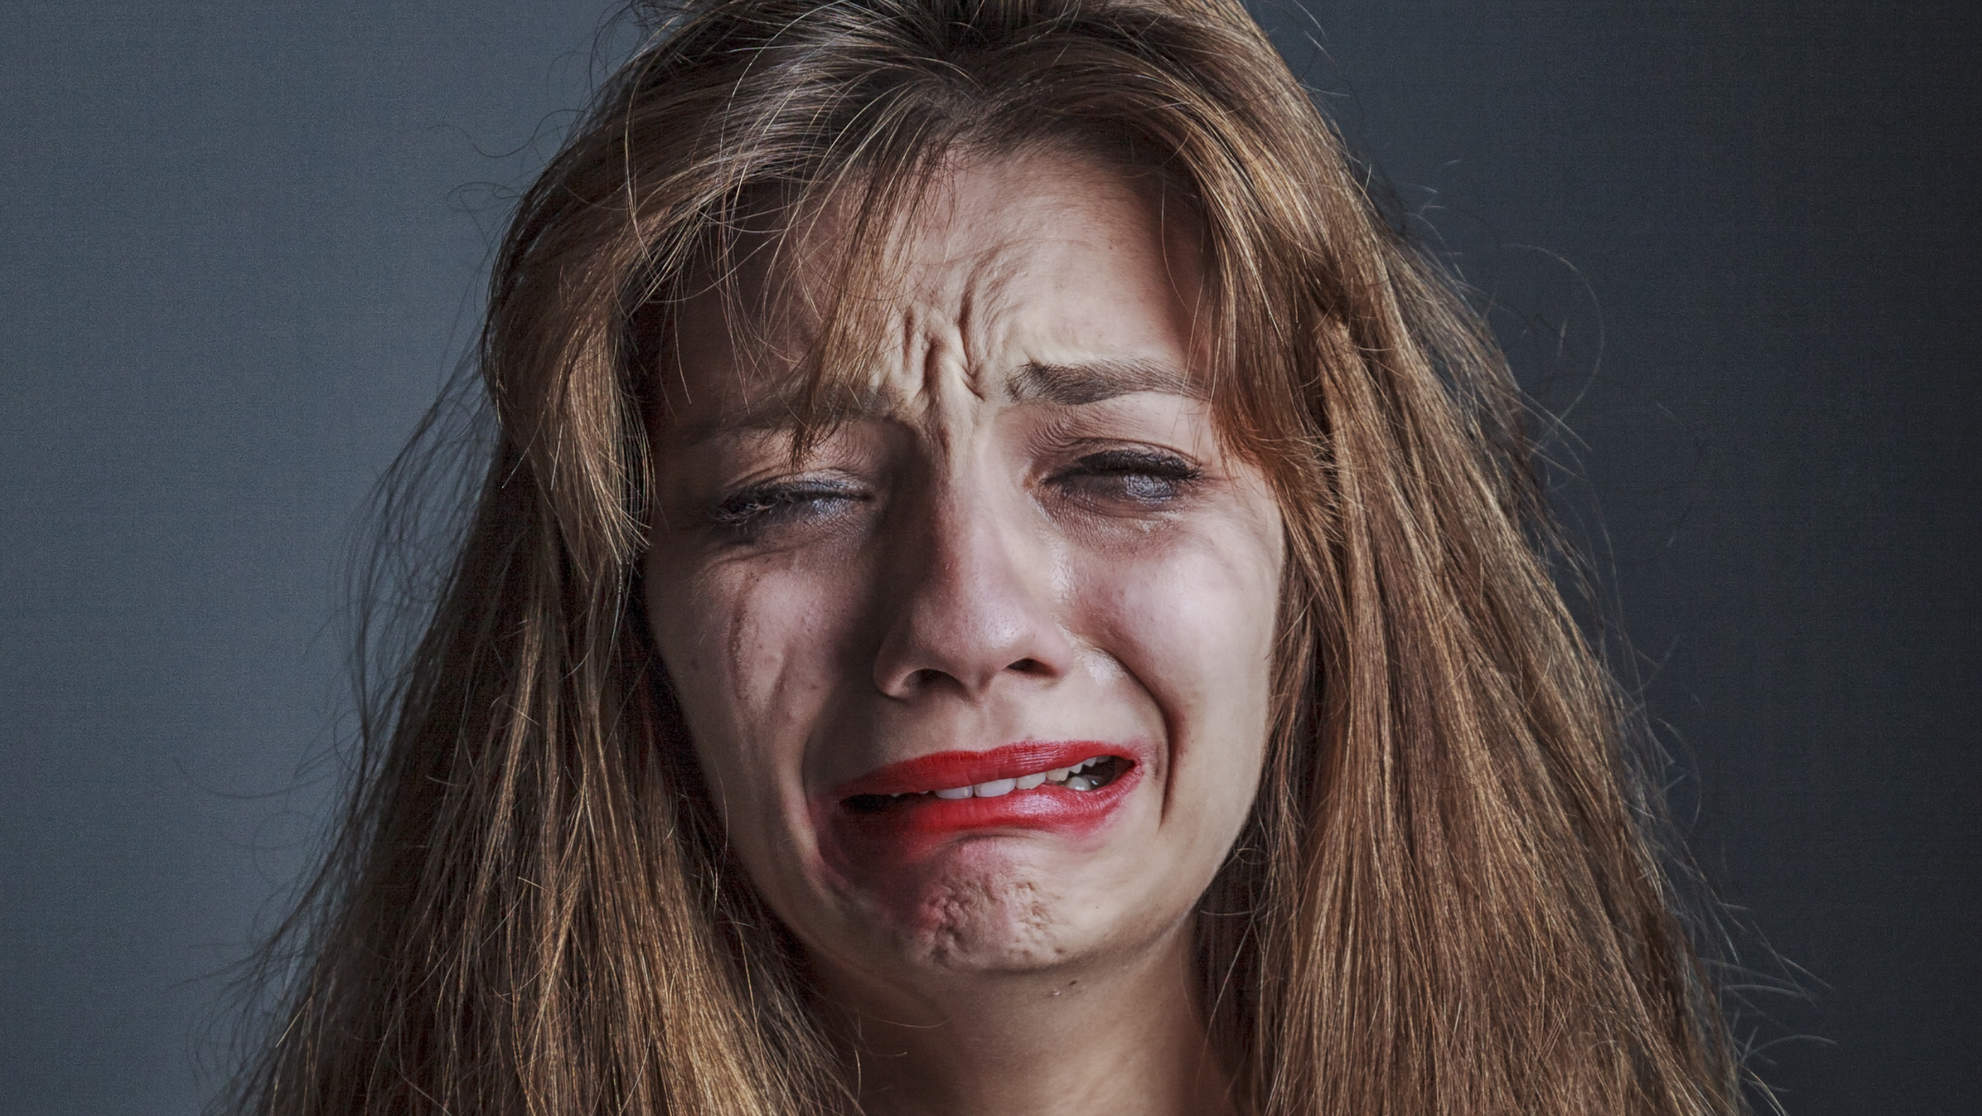 15 Ways to Get Over a Breakup When Your Heart Has Been Shattered